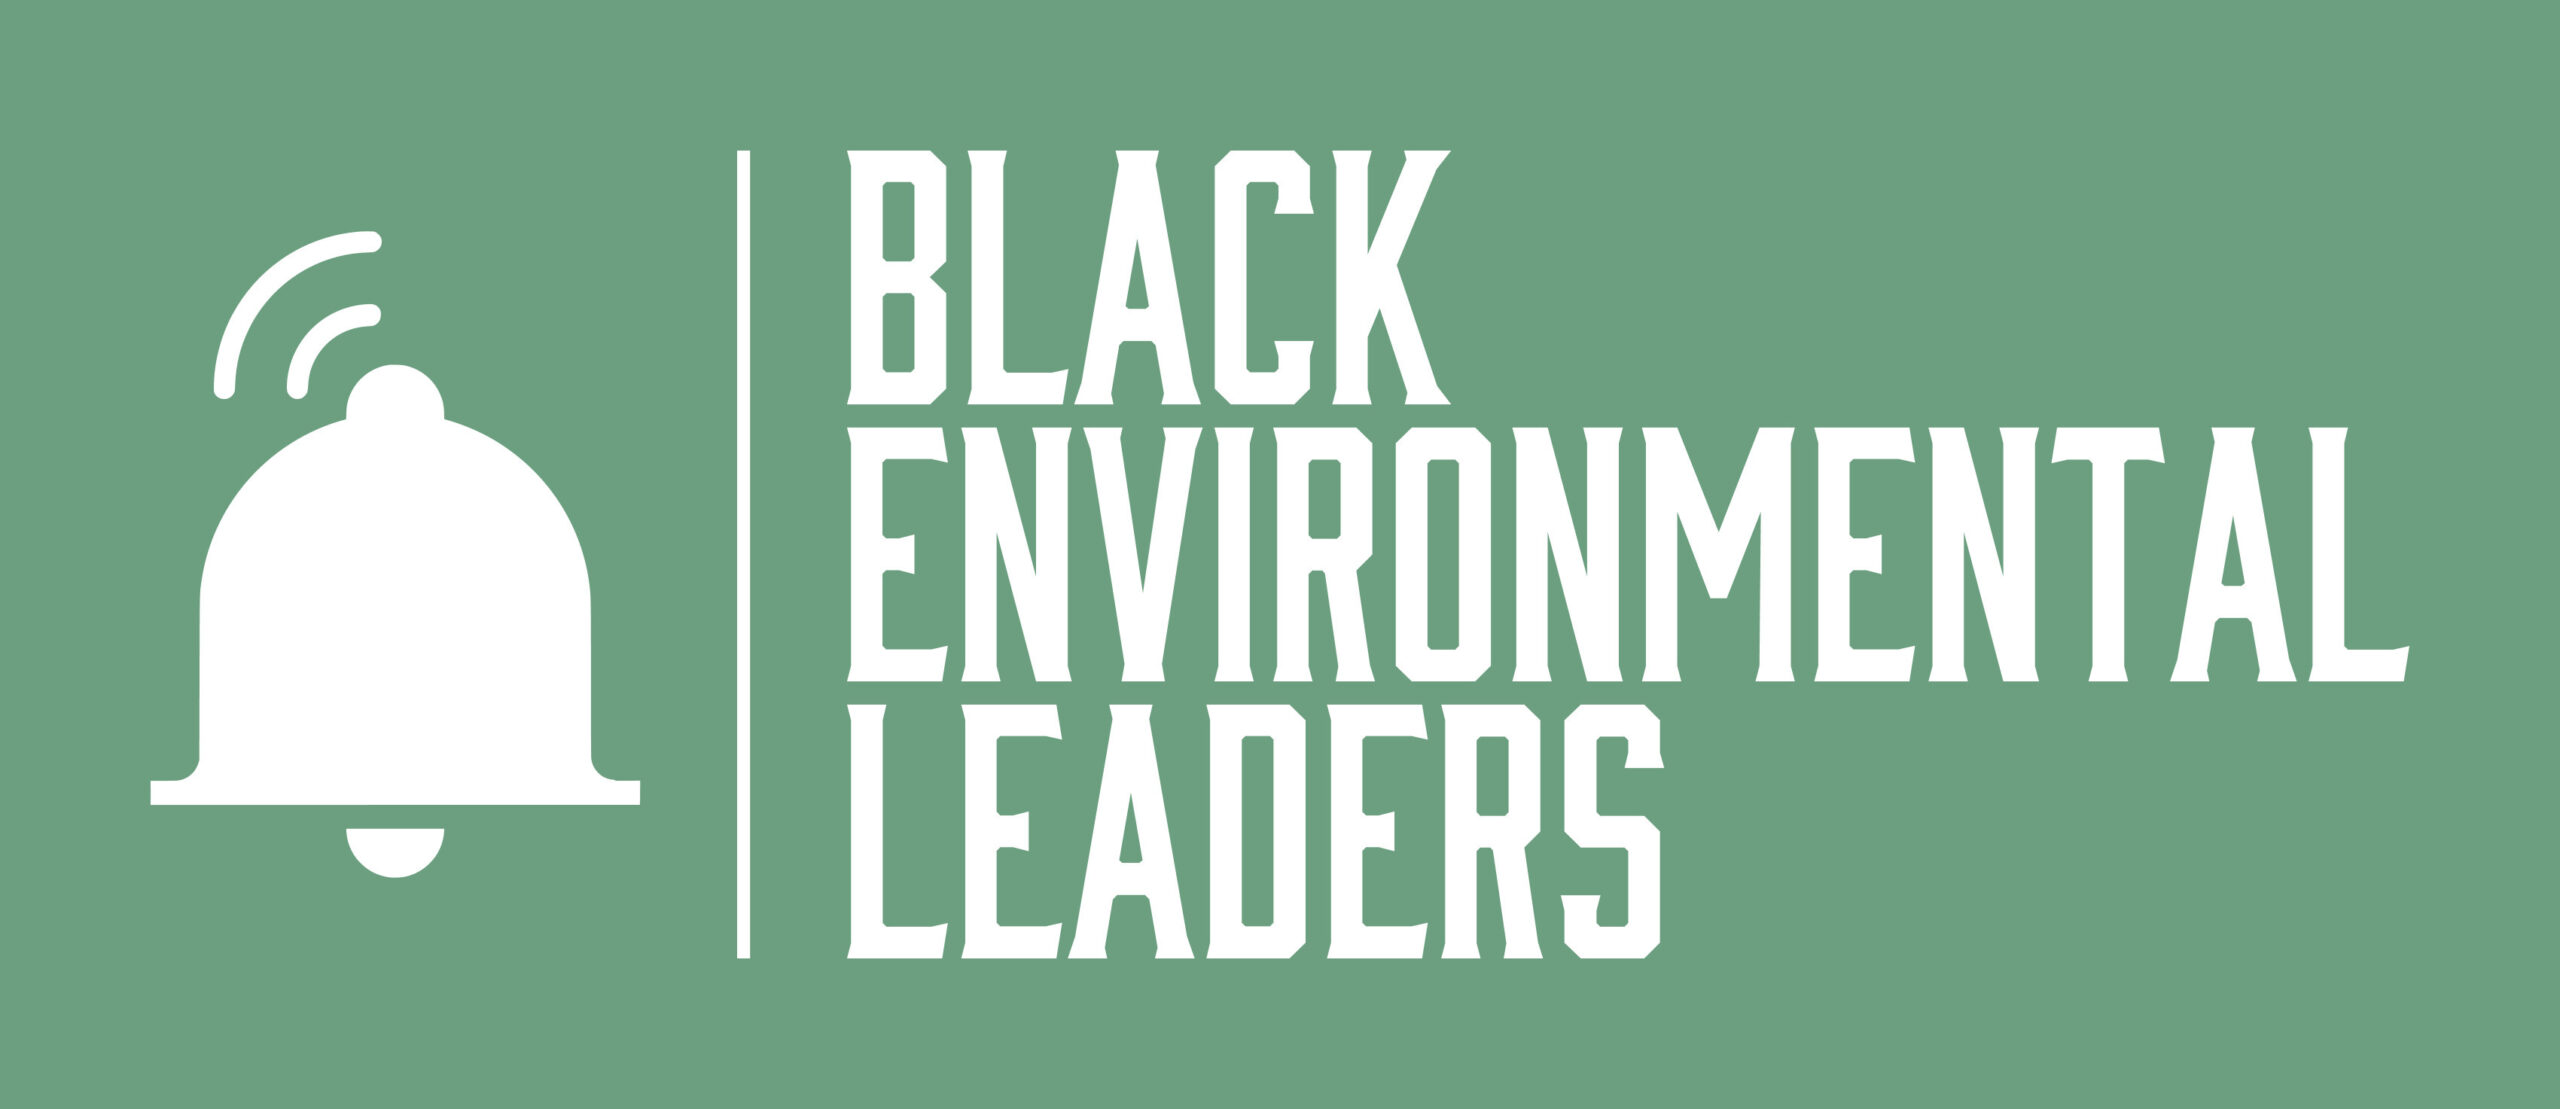 Black Environmental Leaders (BEL) logo. Black Environmental Leaders Association are aligned as stewards of the natural and built environment through collaboration and partnership, to raise awareness and advocate for environmental and economic justice.